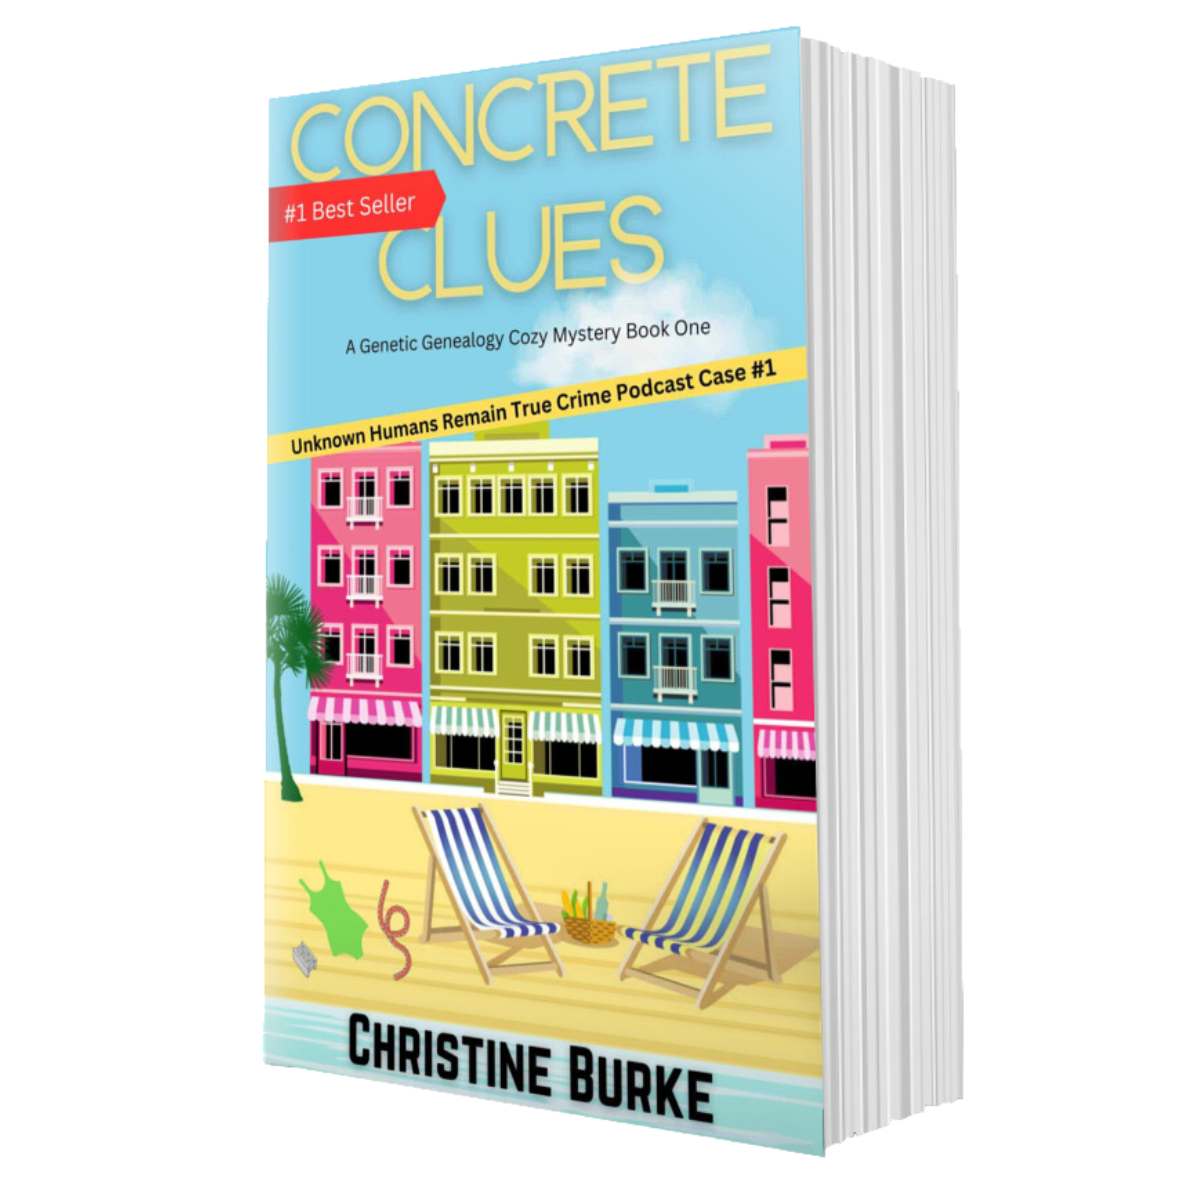 Concrete Clues: A Genetic Genealogy Cozy Mystery Book One (Paperback)